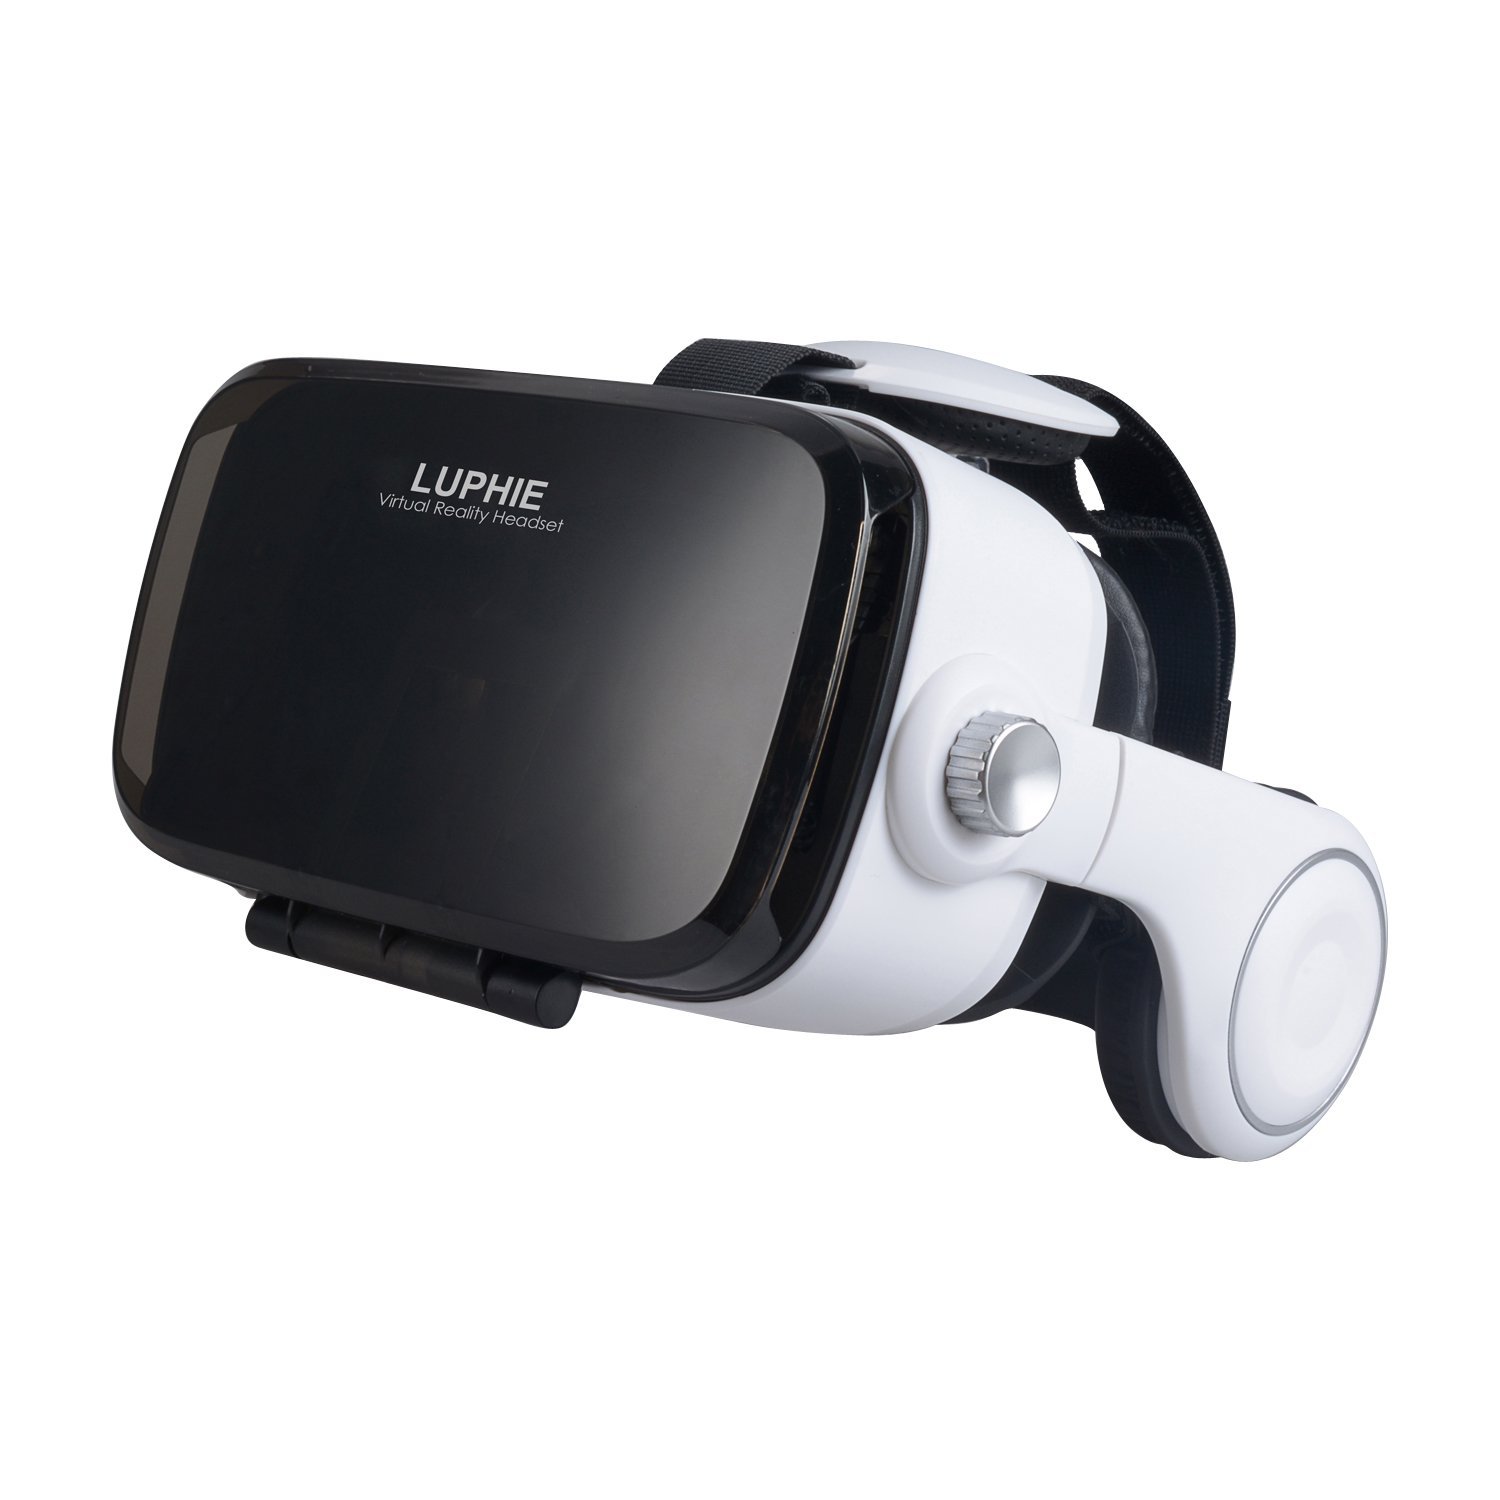 Amazon.com: LUPHIE VR Headset, 3D Virtual Reality Glasses with ...